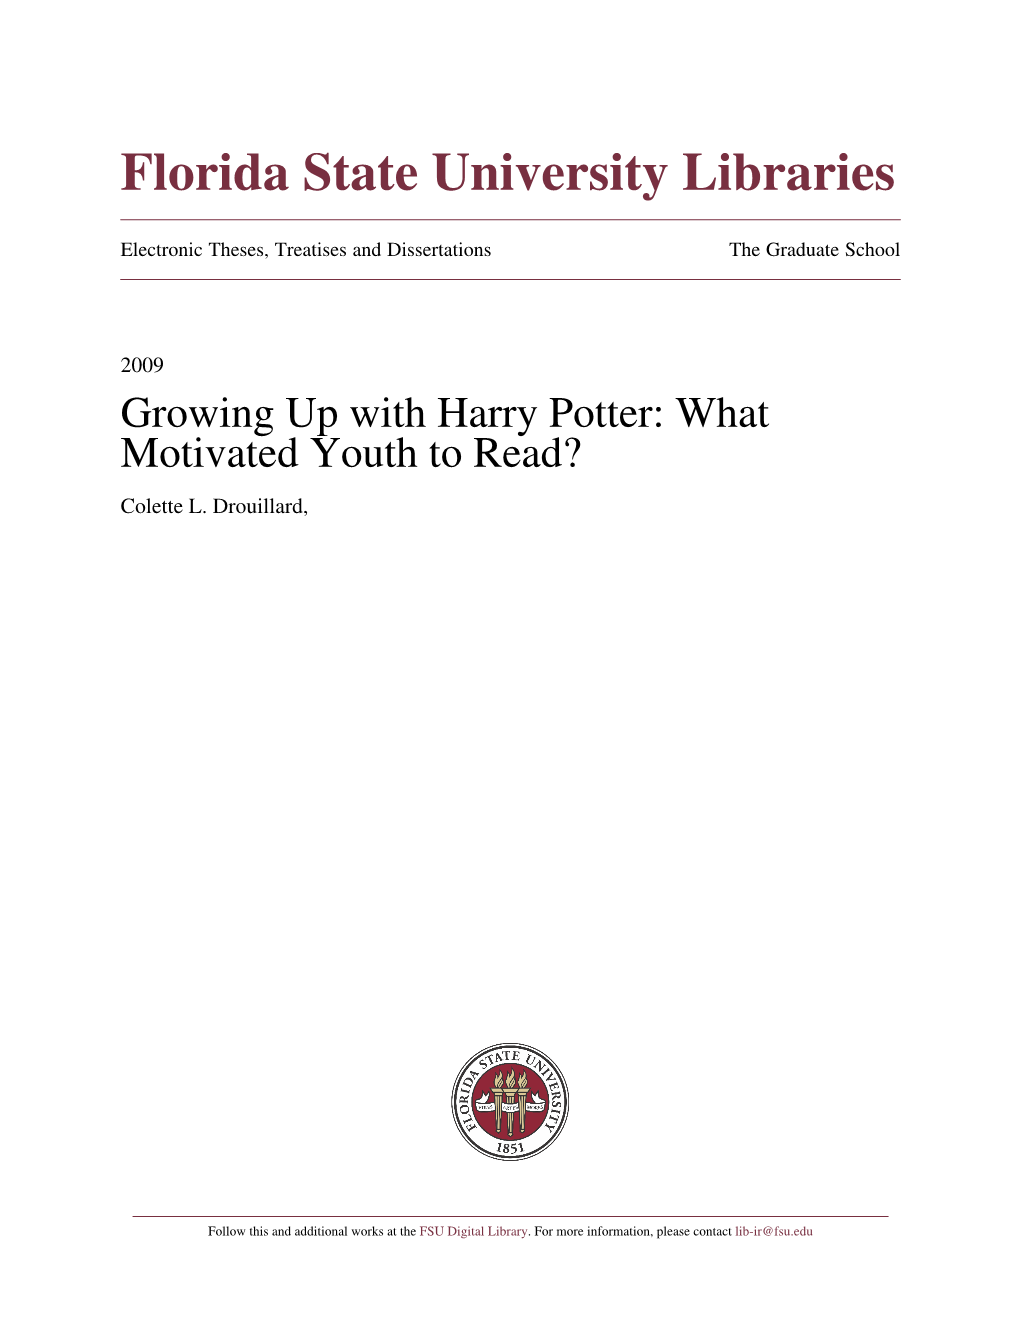 Growing up with Harry Potter: What Motivated Youth to Read? Colette L